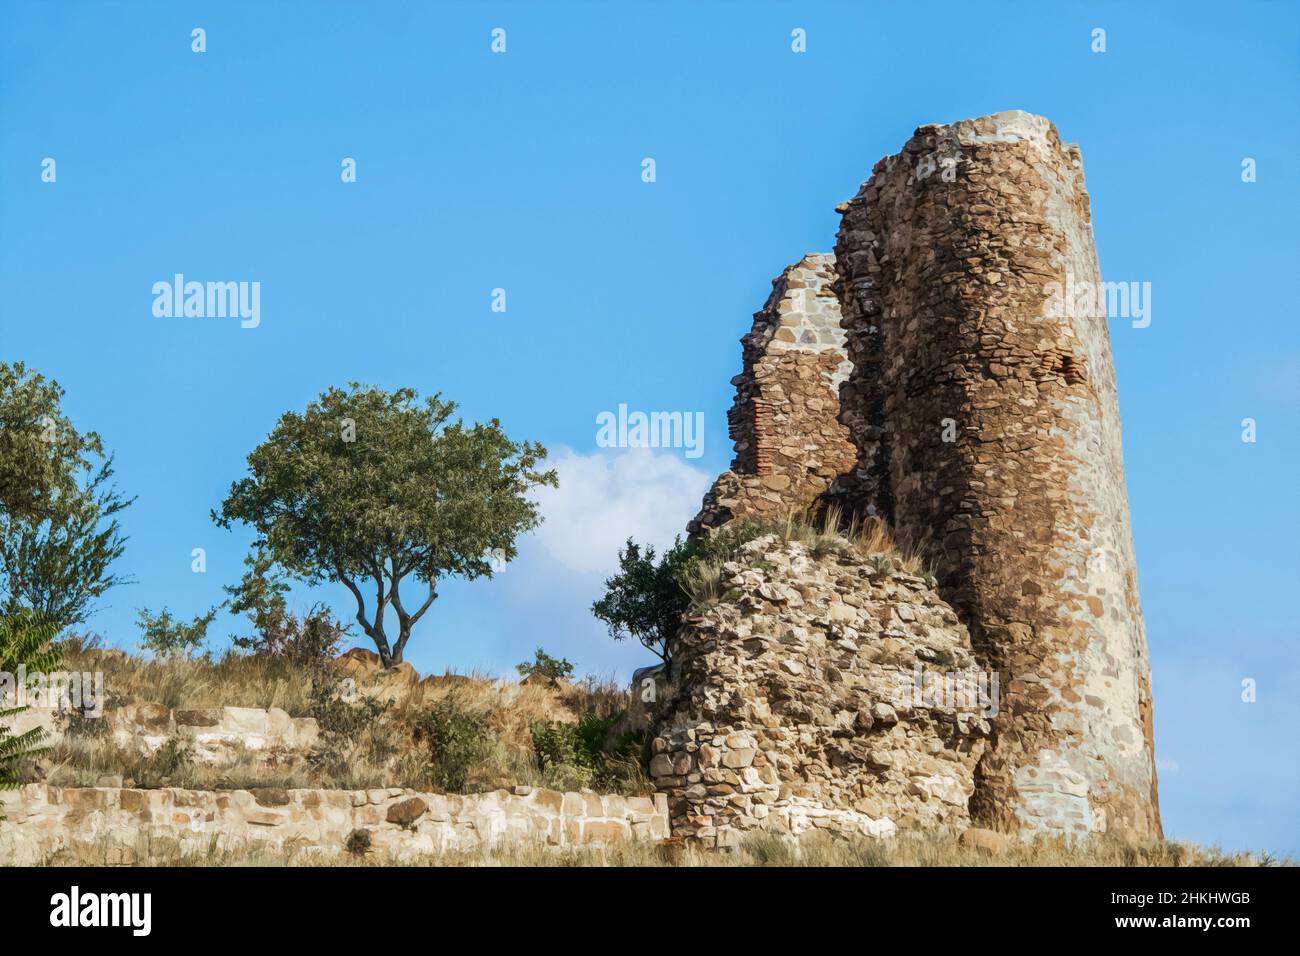 Old ruined tower in Eastern Europe - Part of 6th century Jvari Monastery in Mtskheta Georgia - one of oldest Christian Monasteries in the country- dig Stock Photo